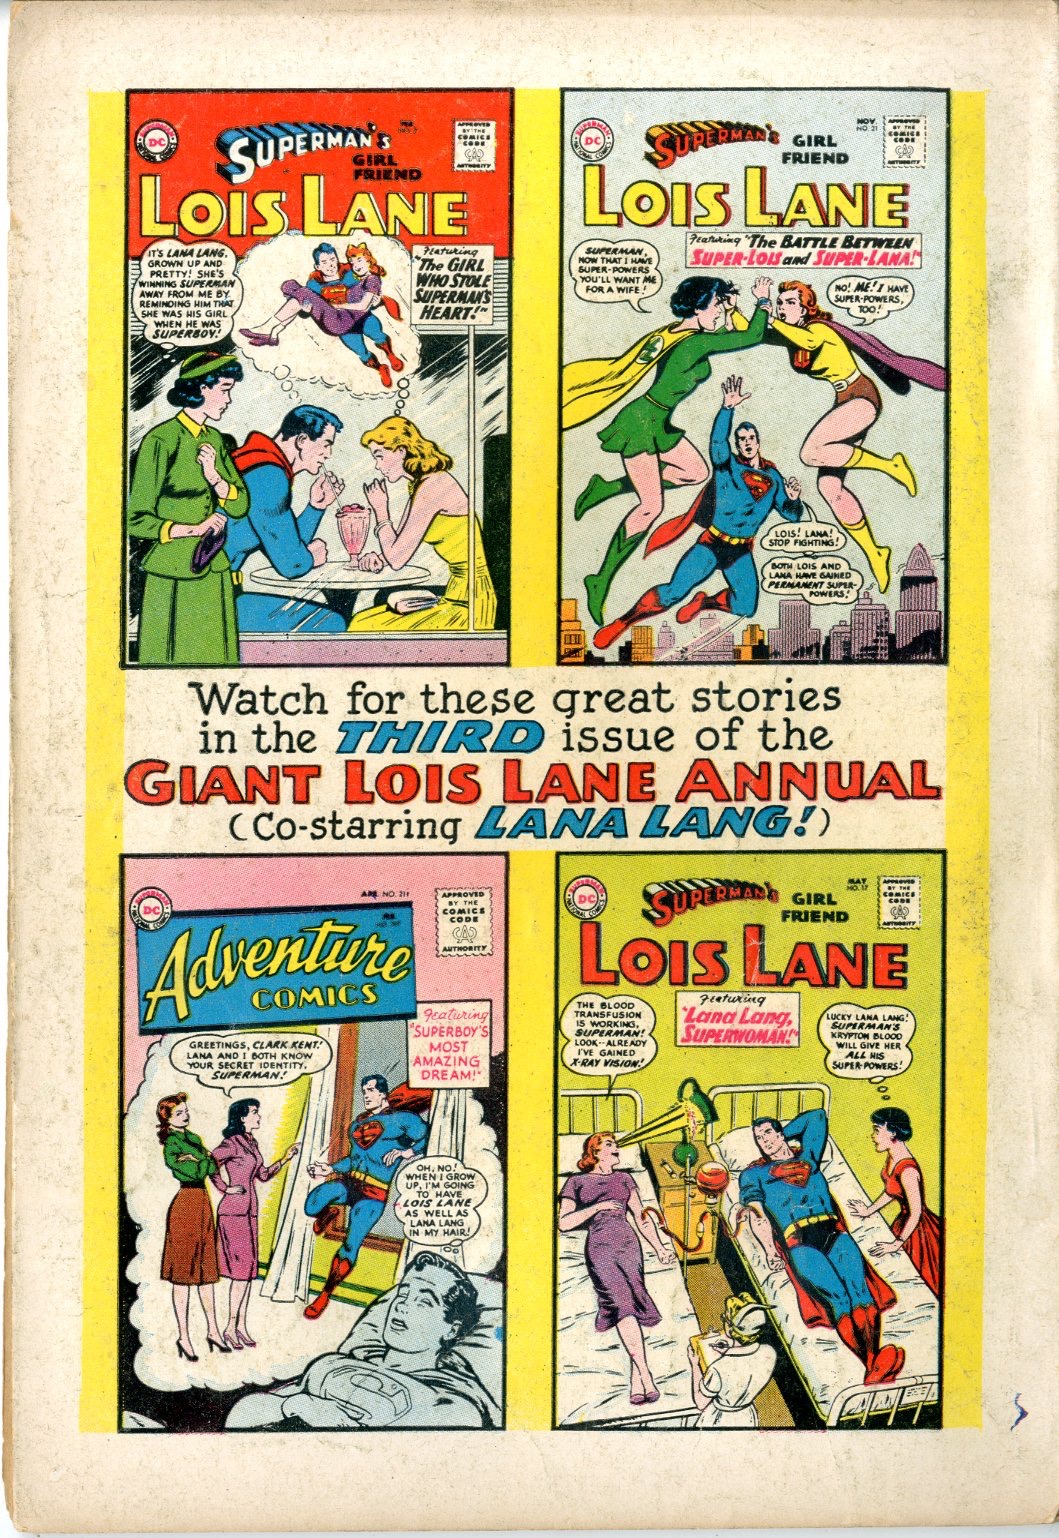 80 Page Giant   Annual - 13100